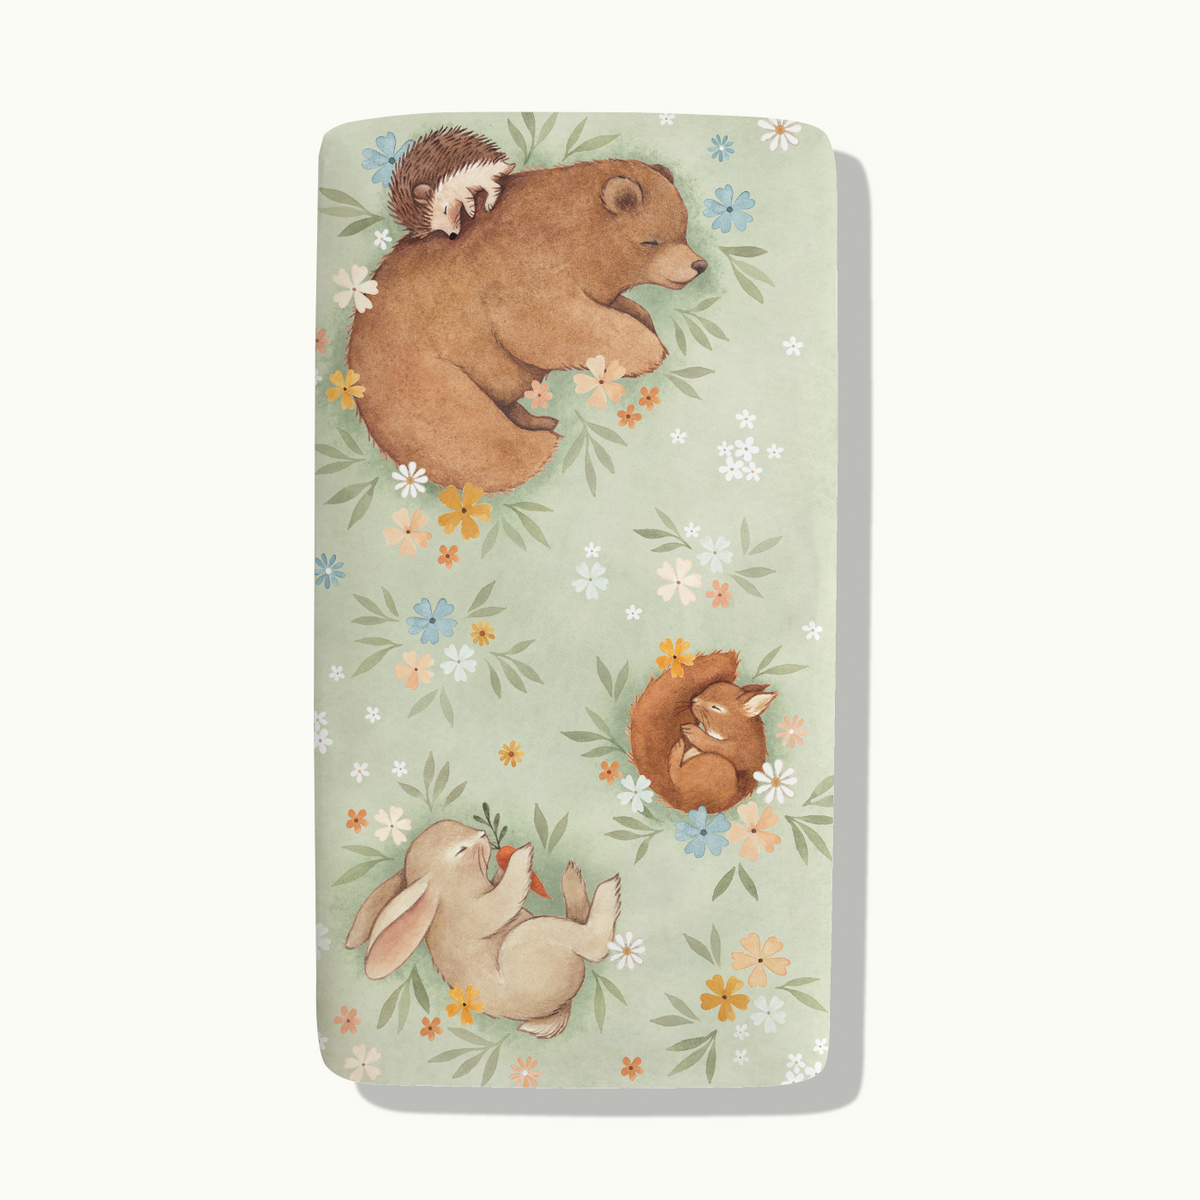 Rookie Humans Enchanted Meadow sheet #color_enchanted meadow